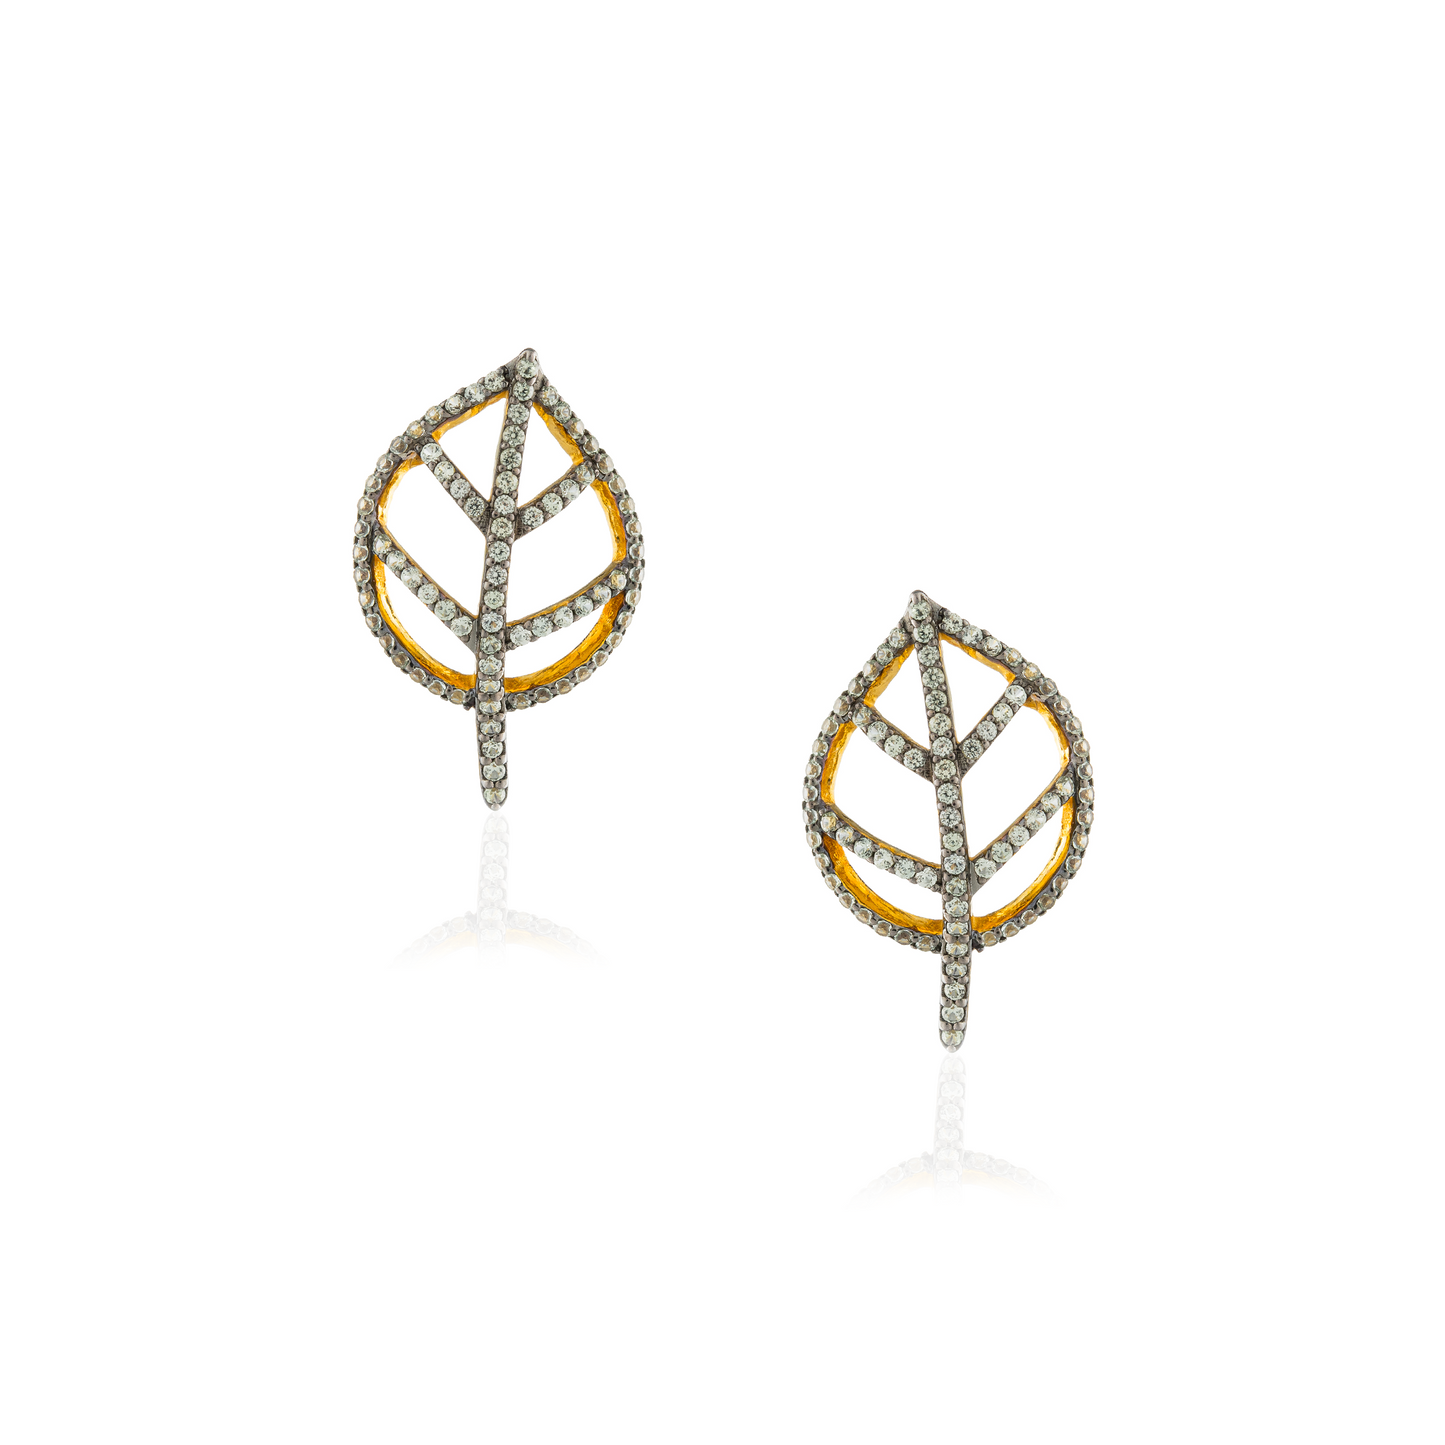 925 Silver Leaf Earrings plated in 18k Yellow Gold with  Green Sapphire